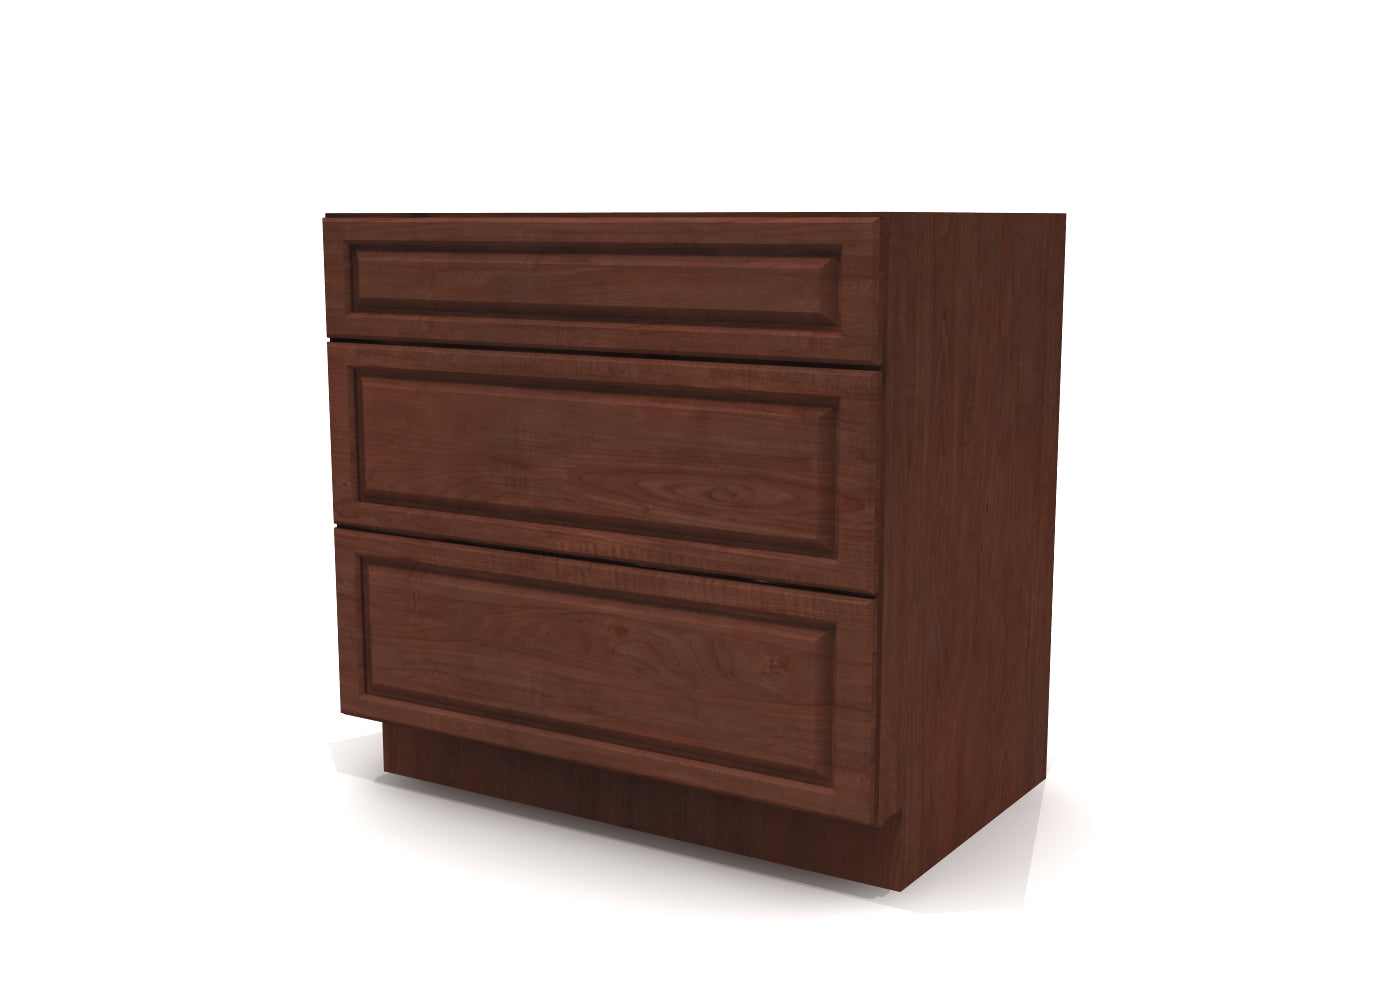 Drawer Base 36" Wide Cherry Raised Panel Cabinet